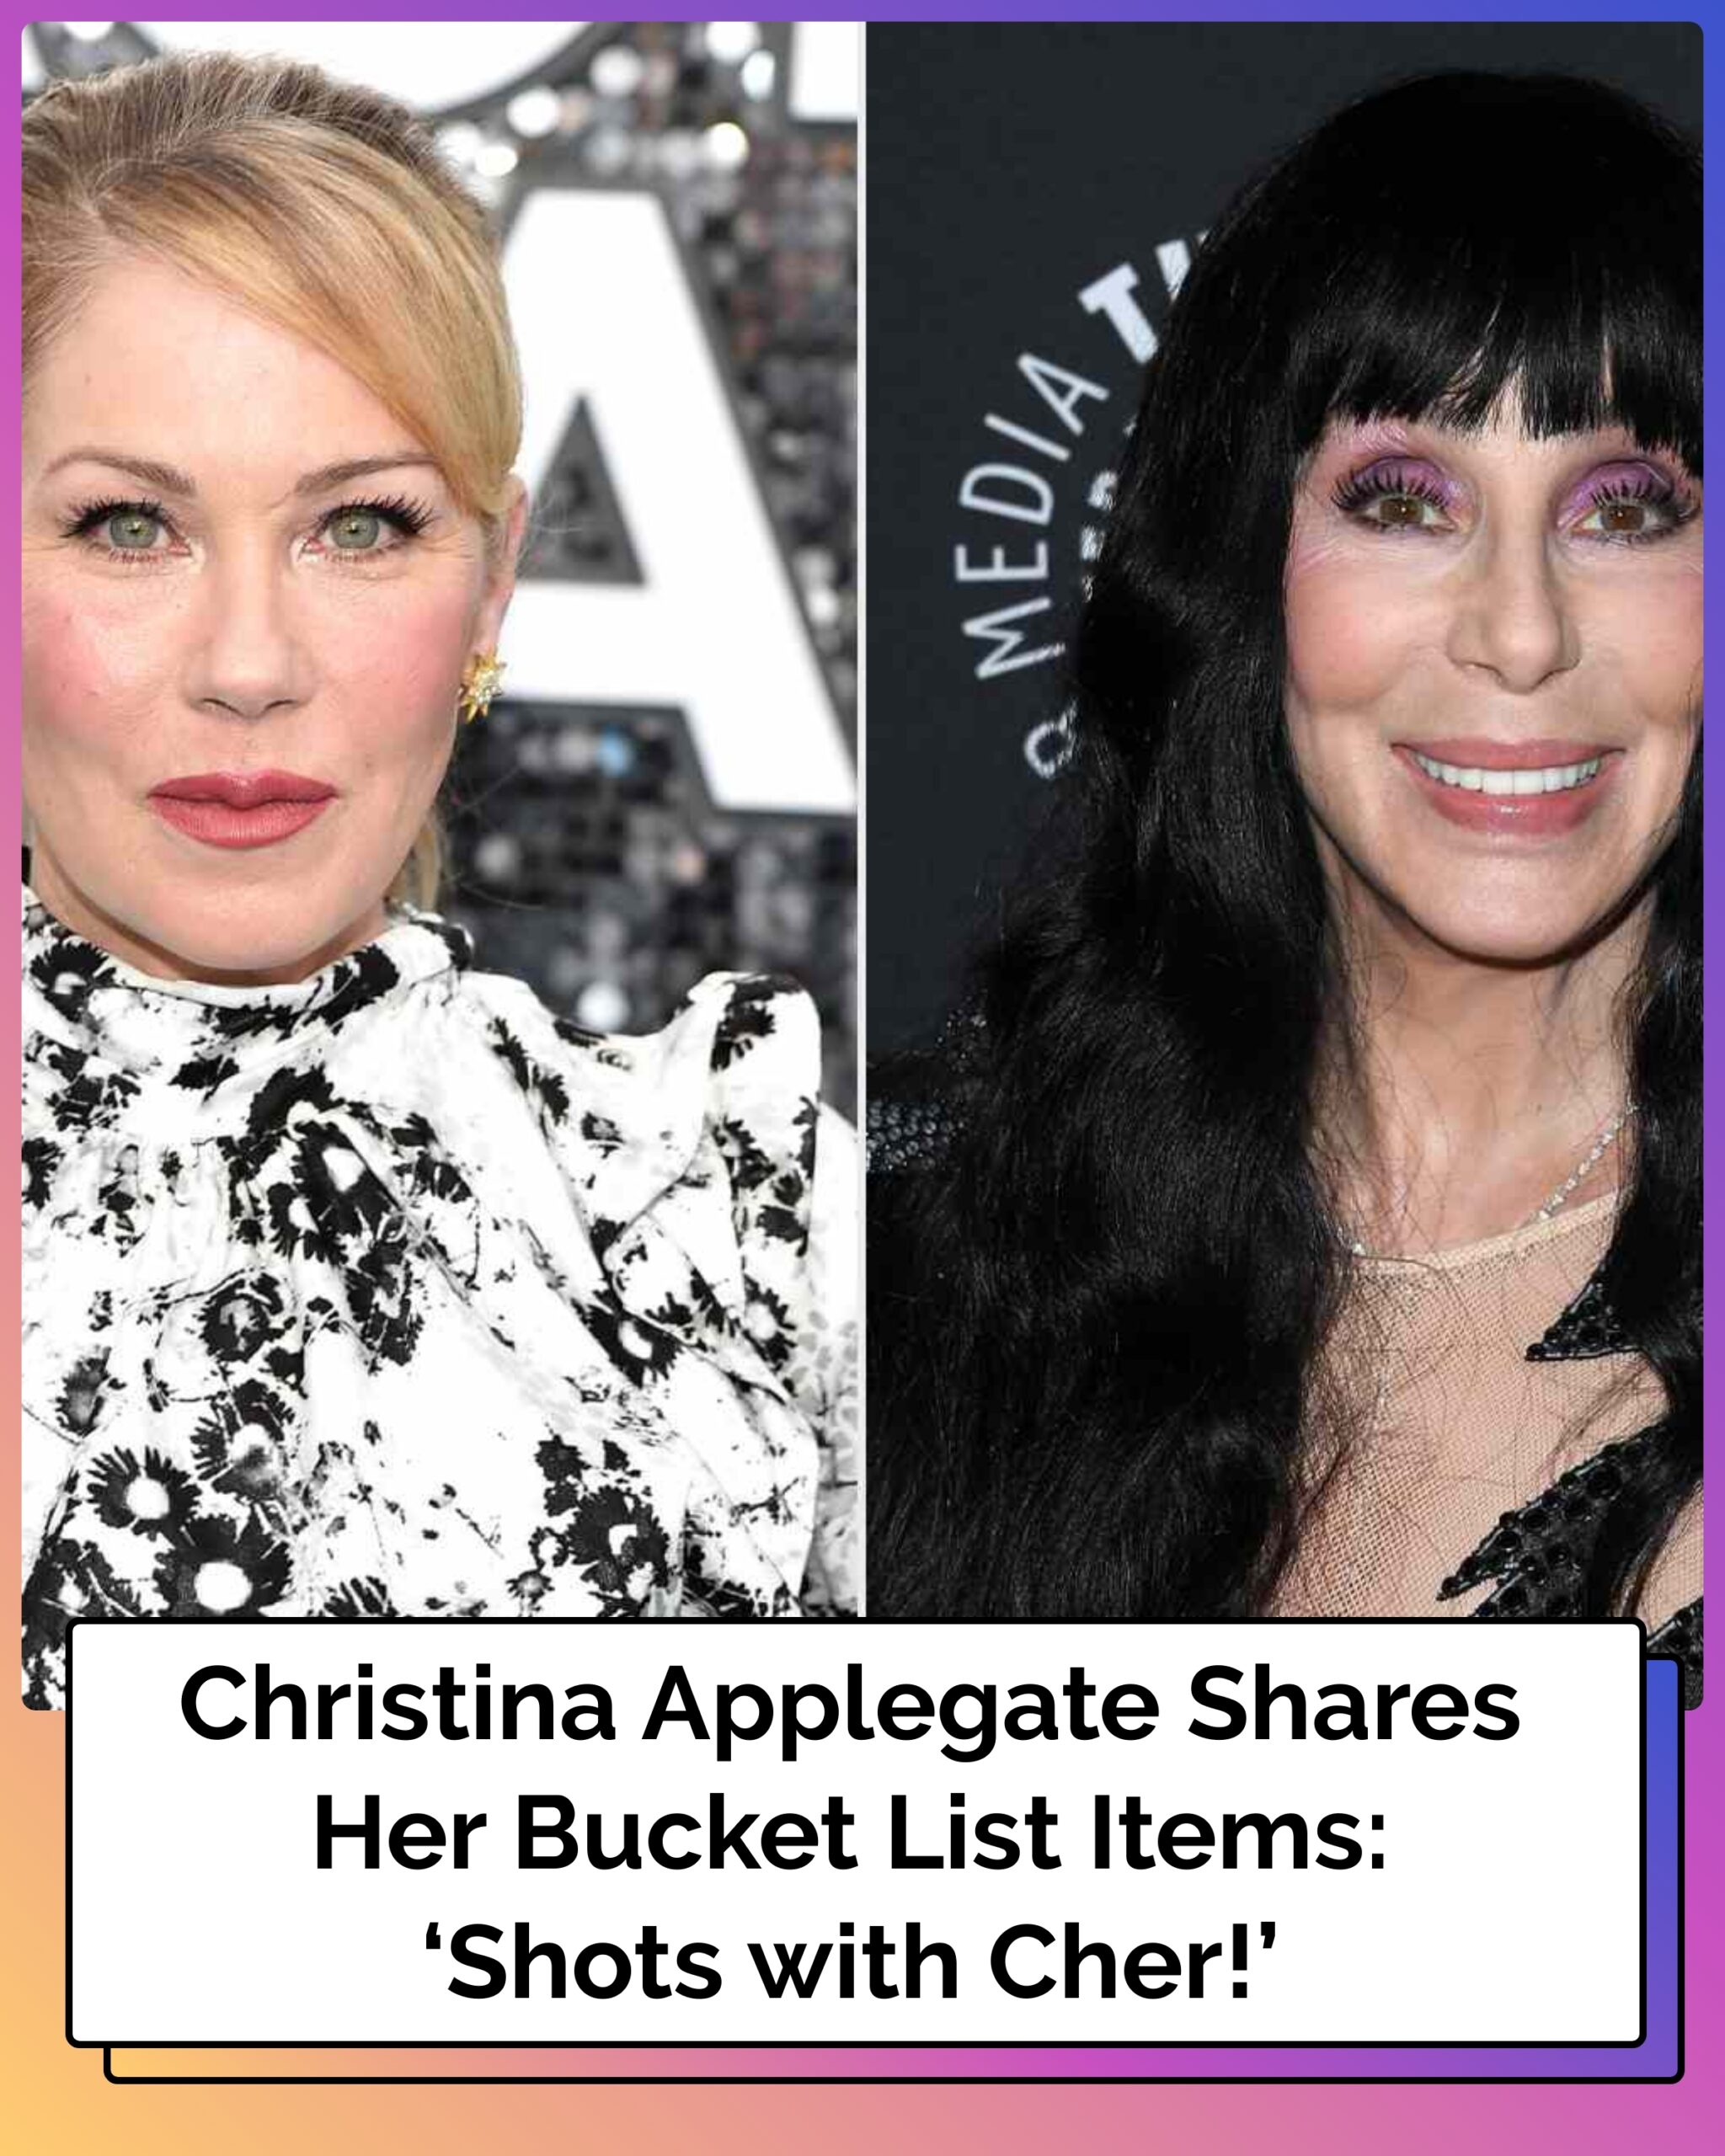 Christina Applegate Shares Her Bucket List Items: ‘Shots with Cher!’